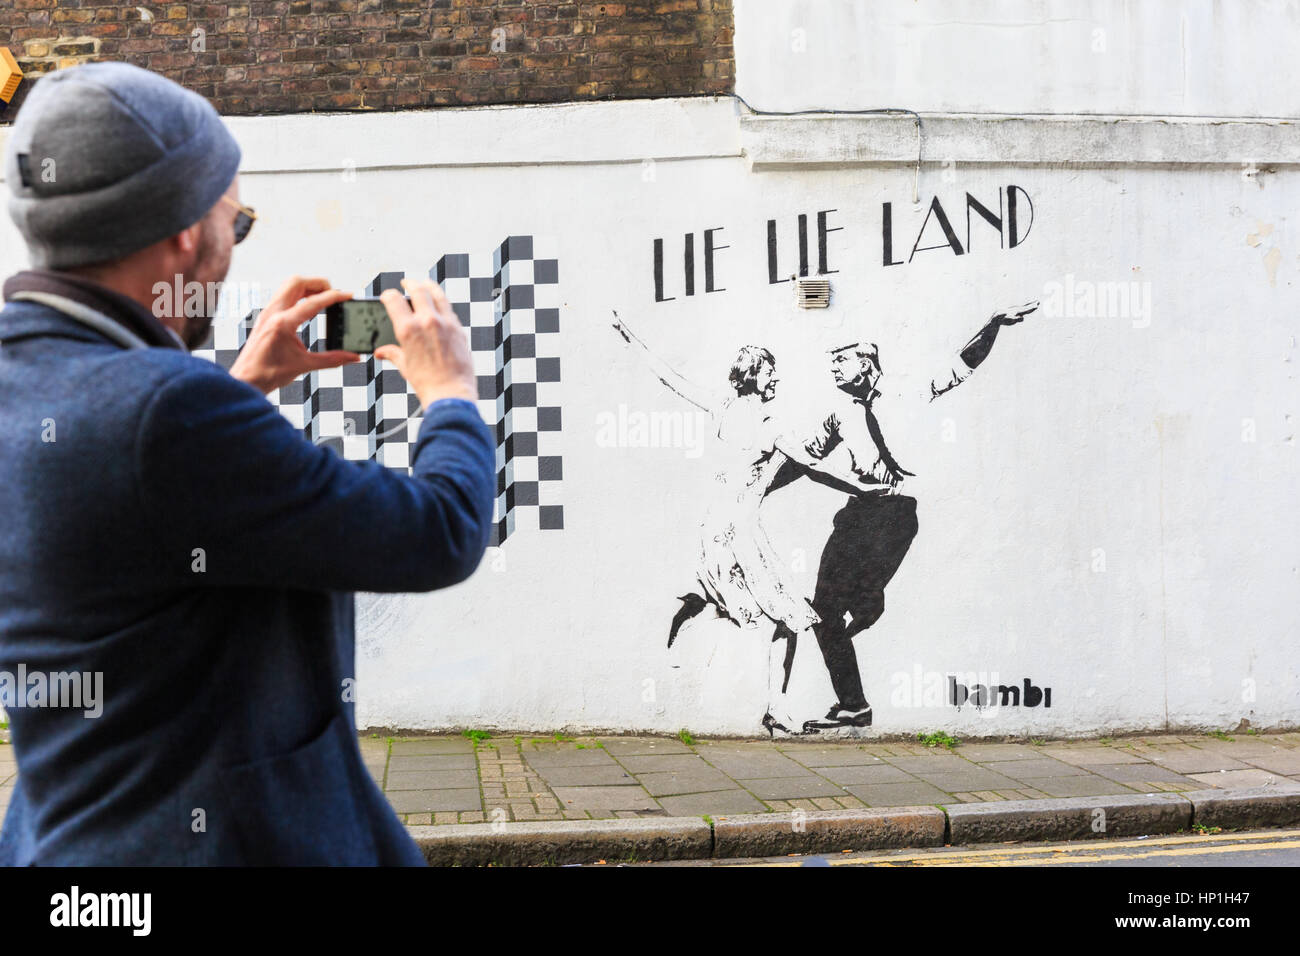 Islington, London, 17th Feb 2017. Passers-by look at a new graffiti by street artist Bambi which depicts US President Donald Trump and British PM Theresa May dancing in 'Lie Lie Land', a reference to the acclaimed film 'La La Land'. The work appeared this week on a side street in Islington. Credit: Imageplotter News and Sports/Alamy Live News Stock Photo